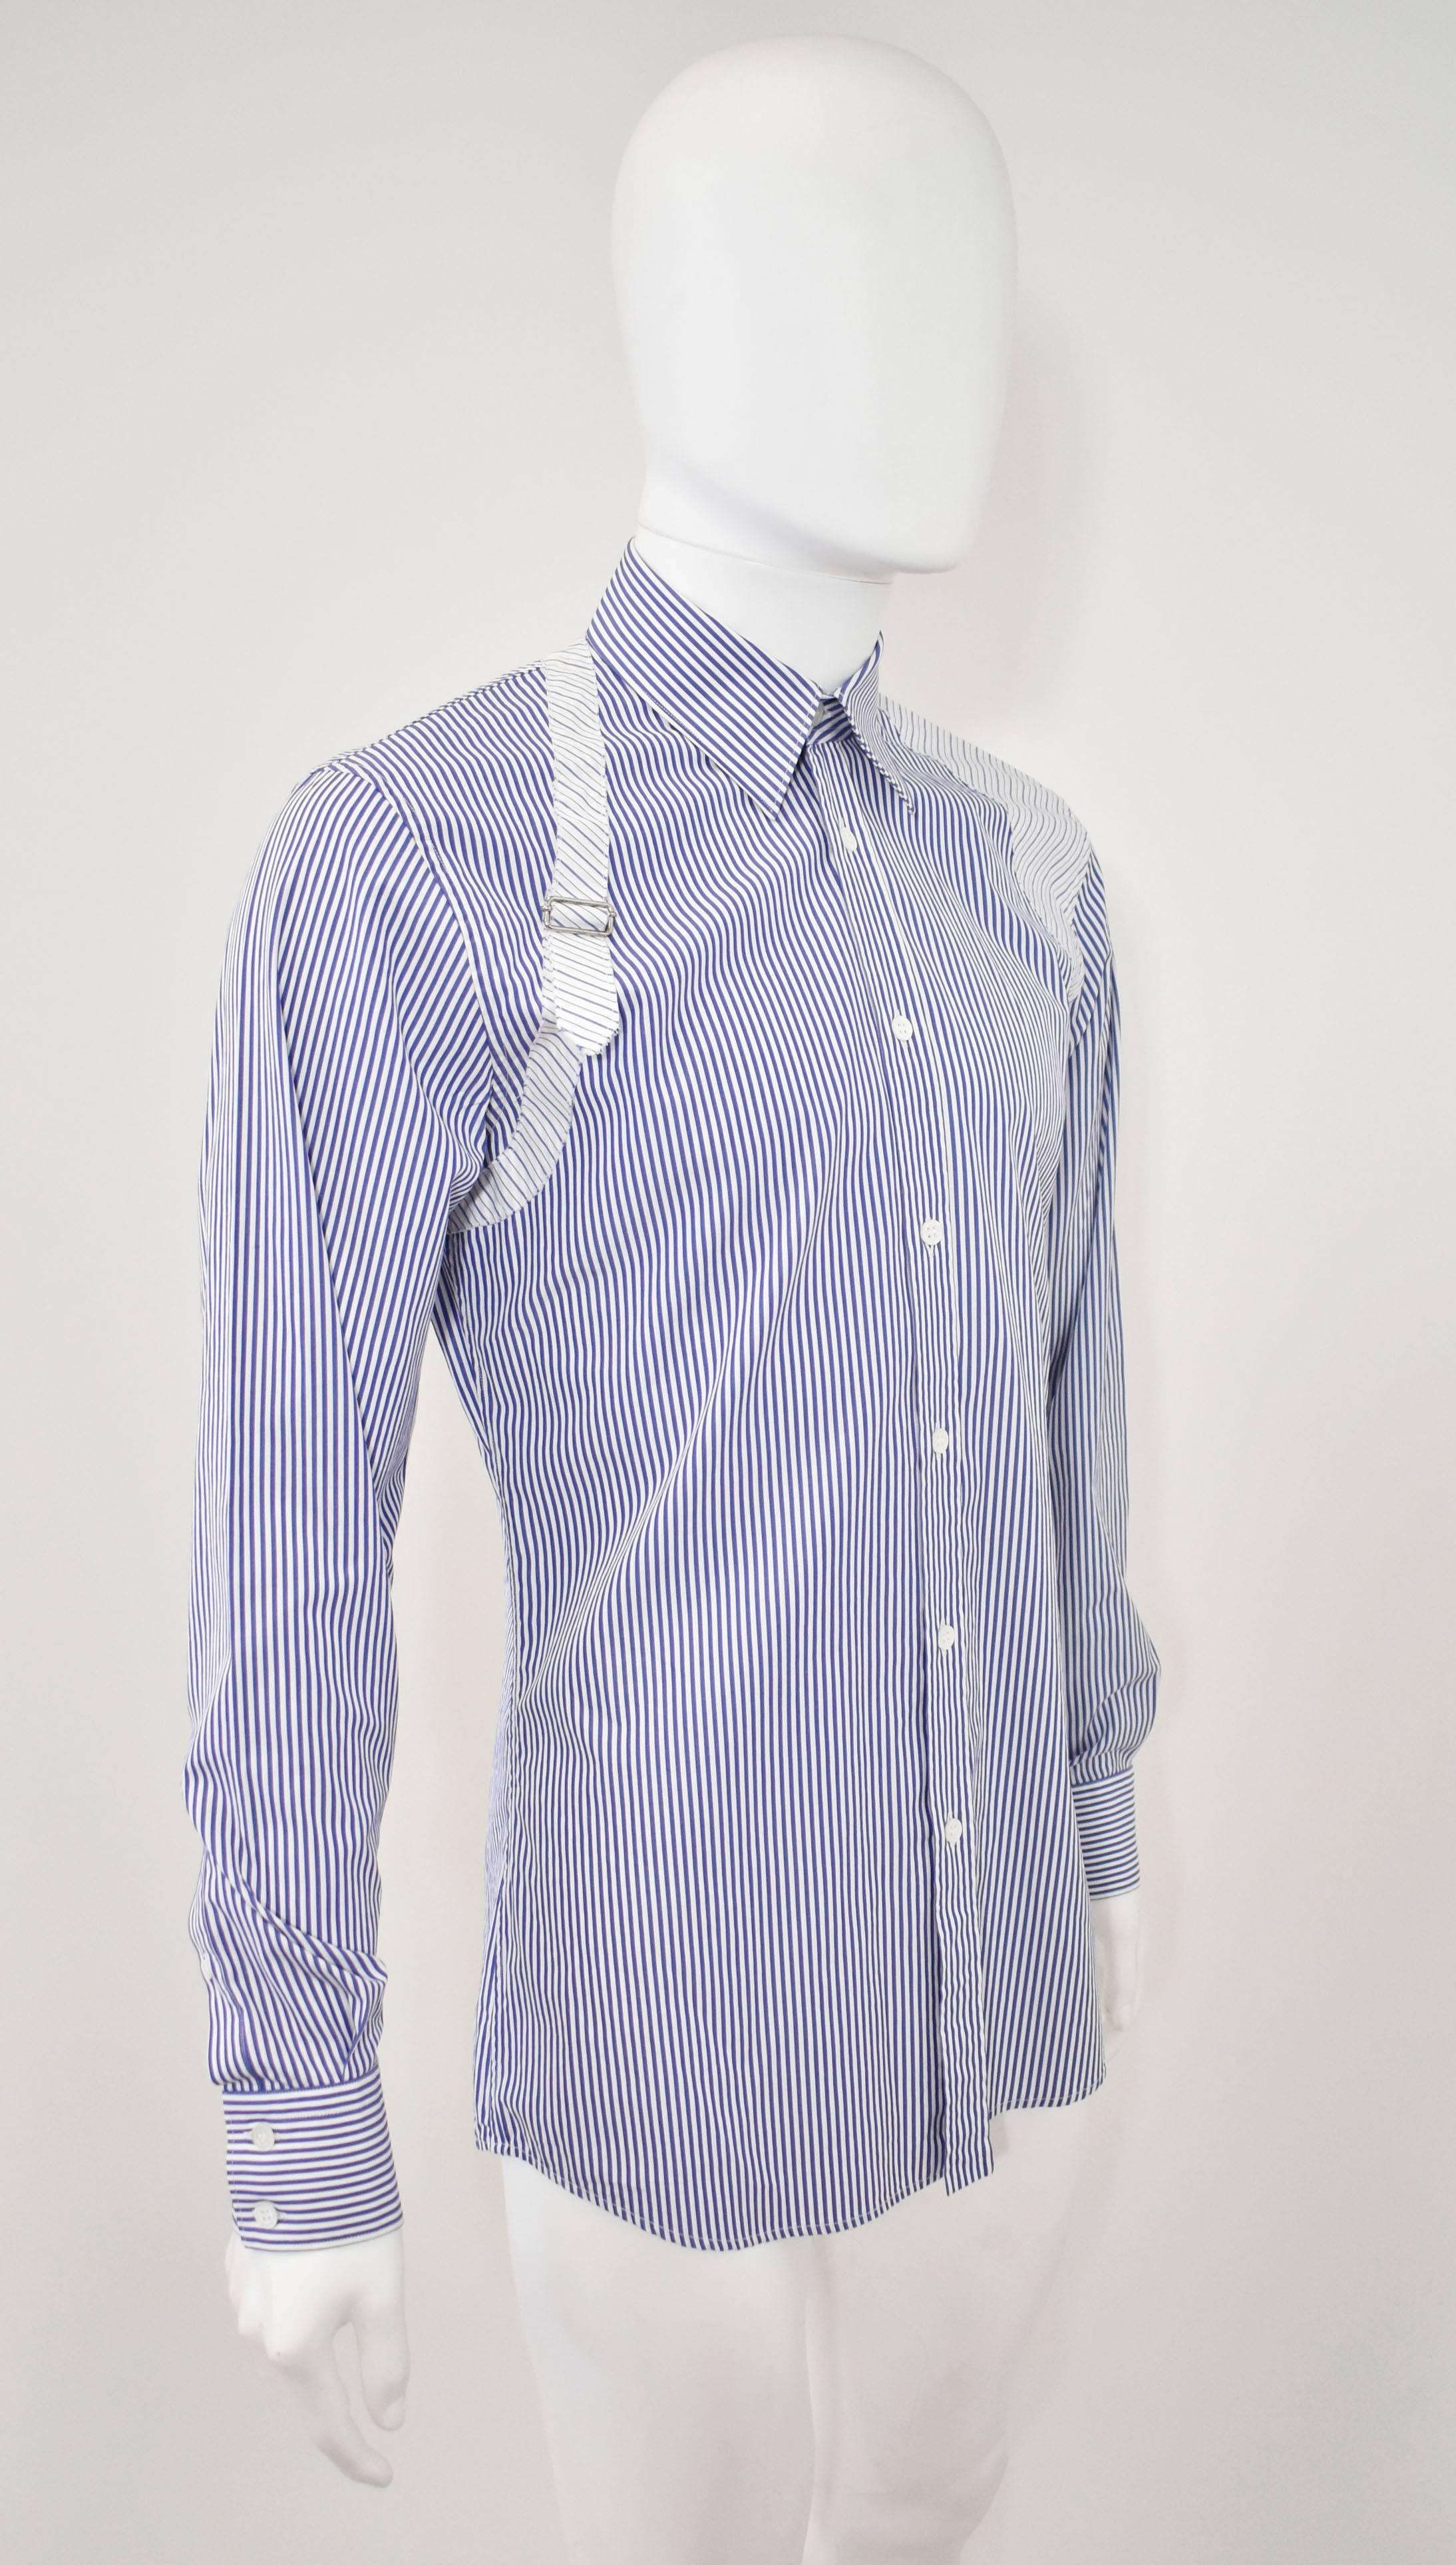 A white & blue stripe shirt with harness by Alexander Mcqueen. This is a press sample from the A/W 2015 menswear collection. It is in excellent condition. 


Length - 33
Bust - 40
Waist - 36
Hips - 39
Sleeve Length - 26.5